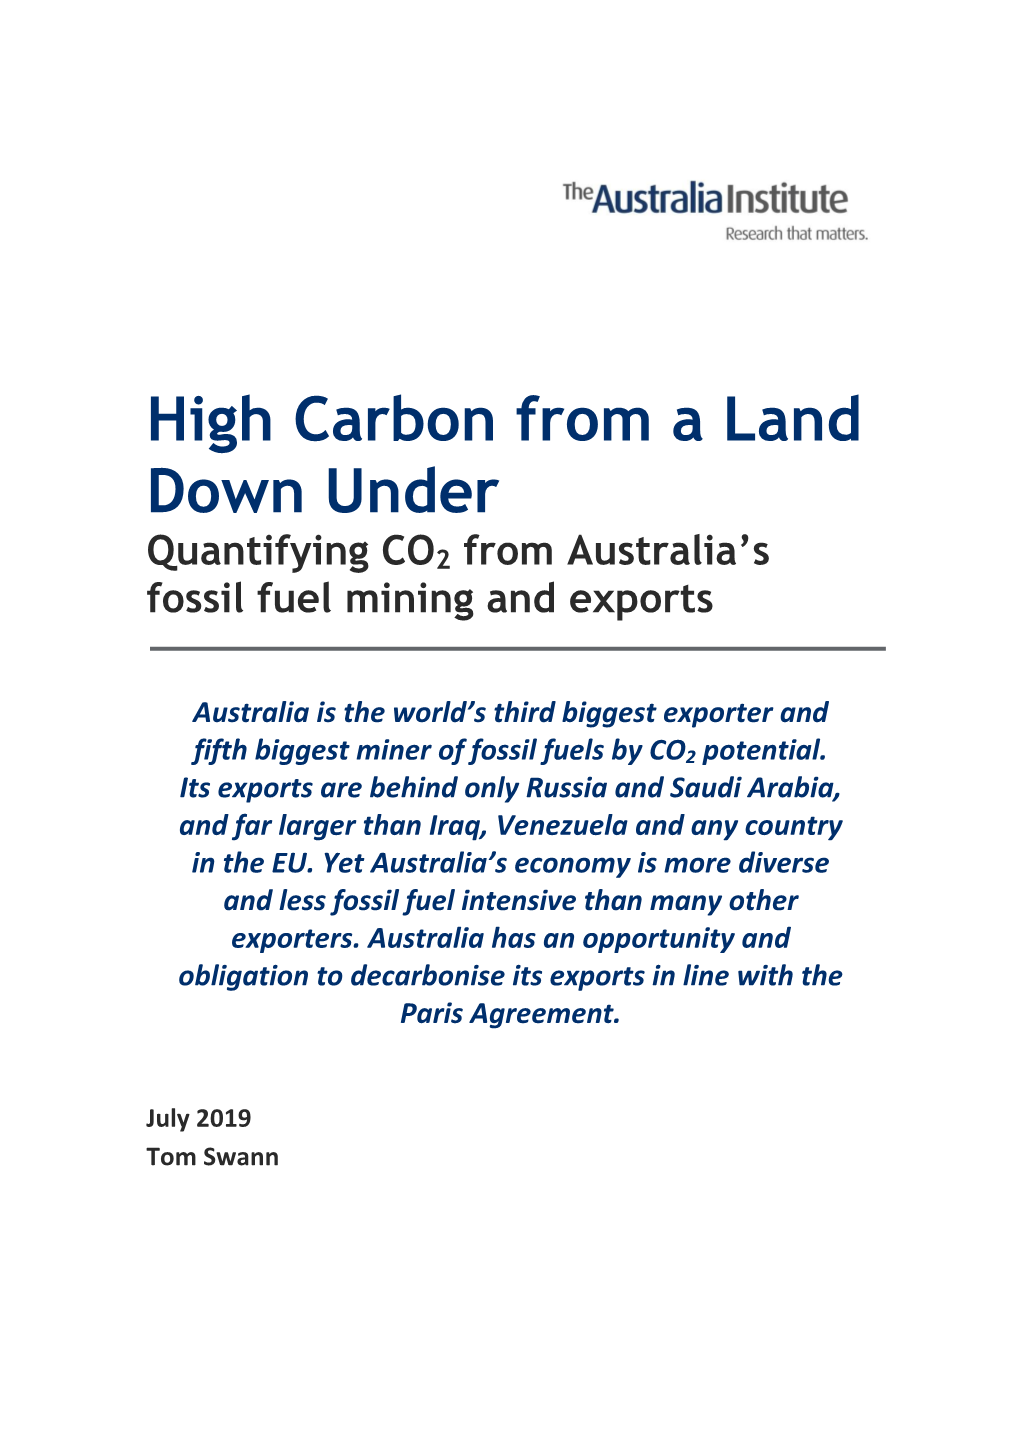 High Carbon from a Land Down Under Quantifying CO2 from Australia’S Fossil Fuel Mining and Exports